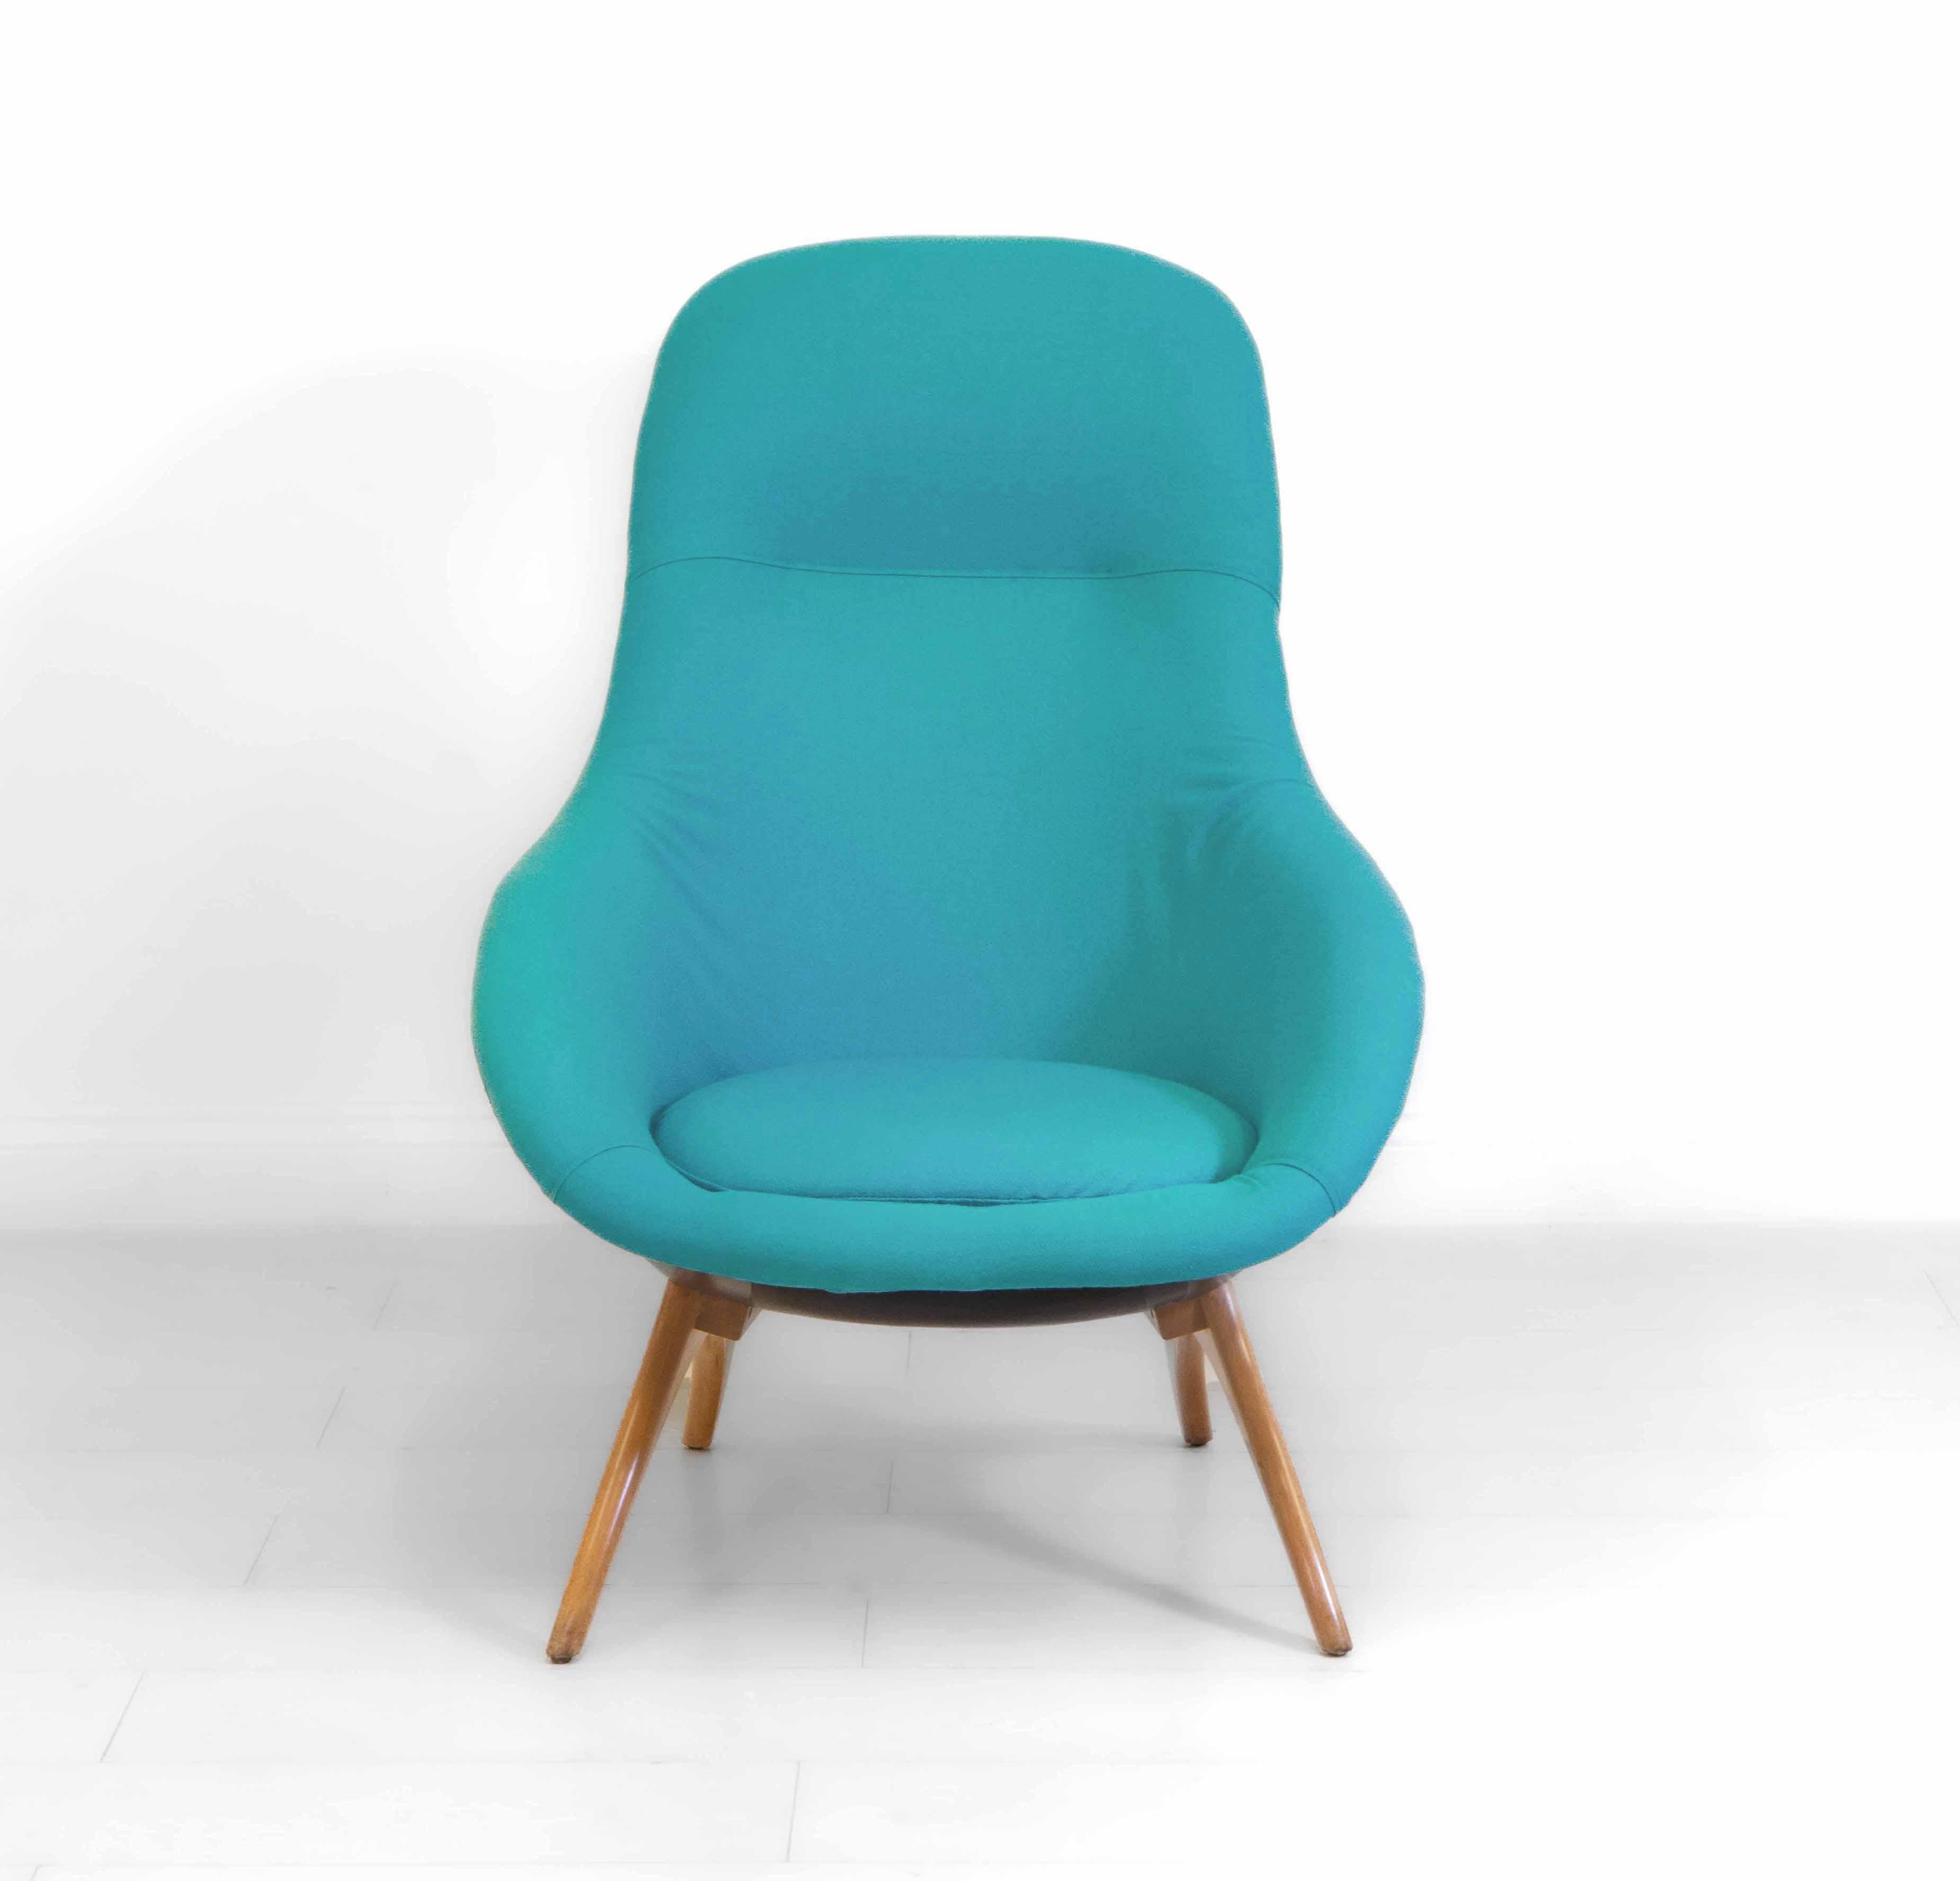 Stylish midcentury lounge chair by Lurashell, with black fibreglass shell, standing on shaped beechwood legs. Turquoise upholstery. Maker's embossed mark along with the number 1. Beverley range. 1960s.

